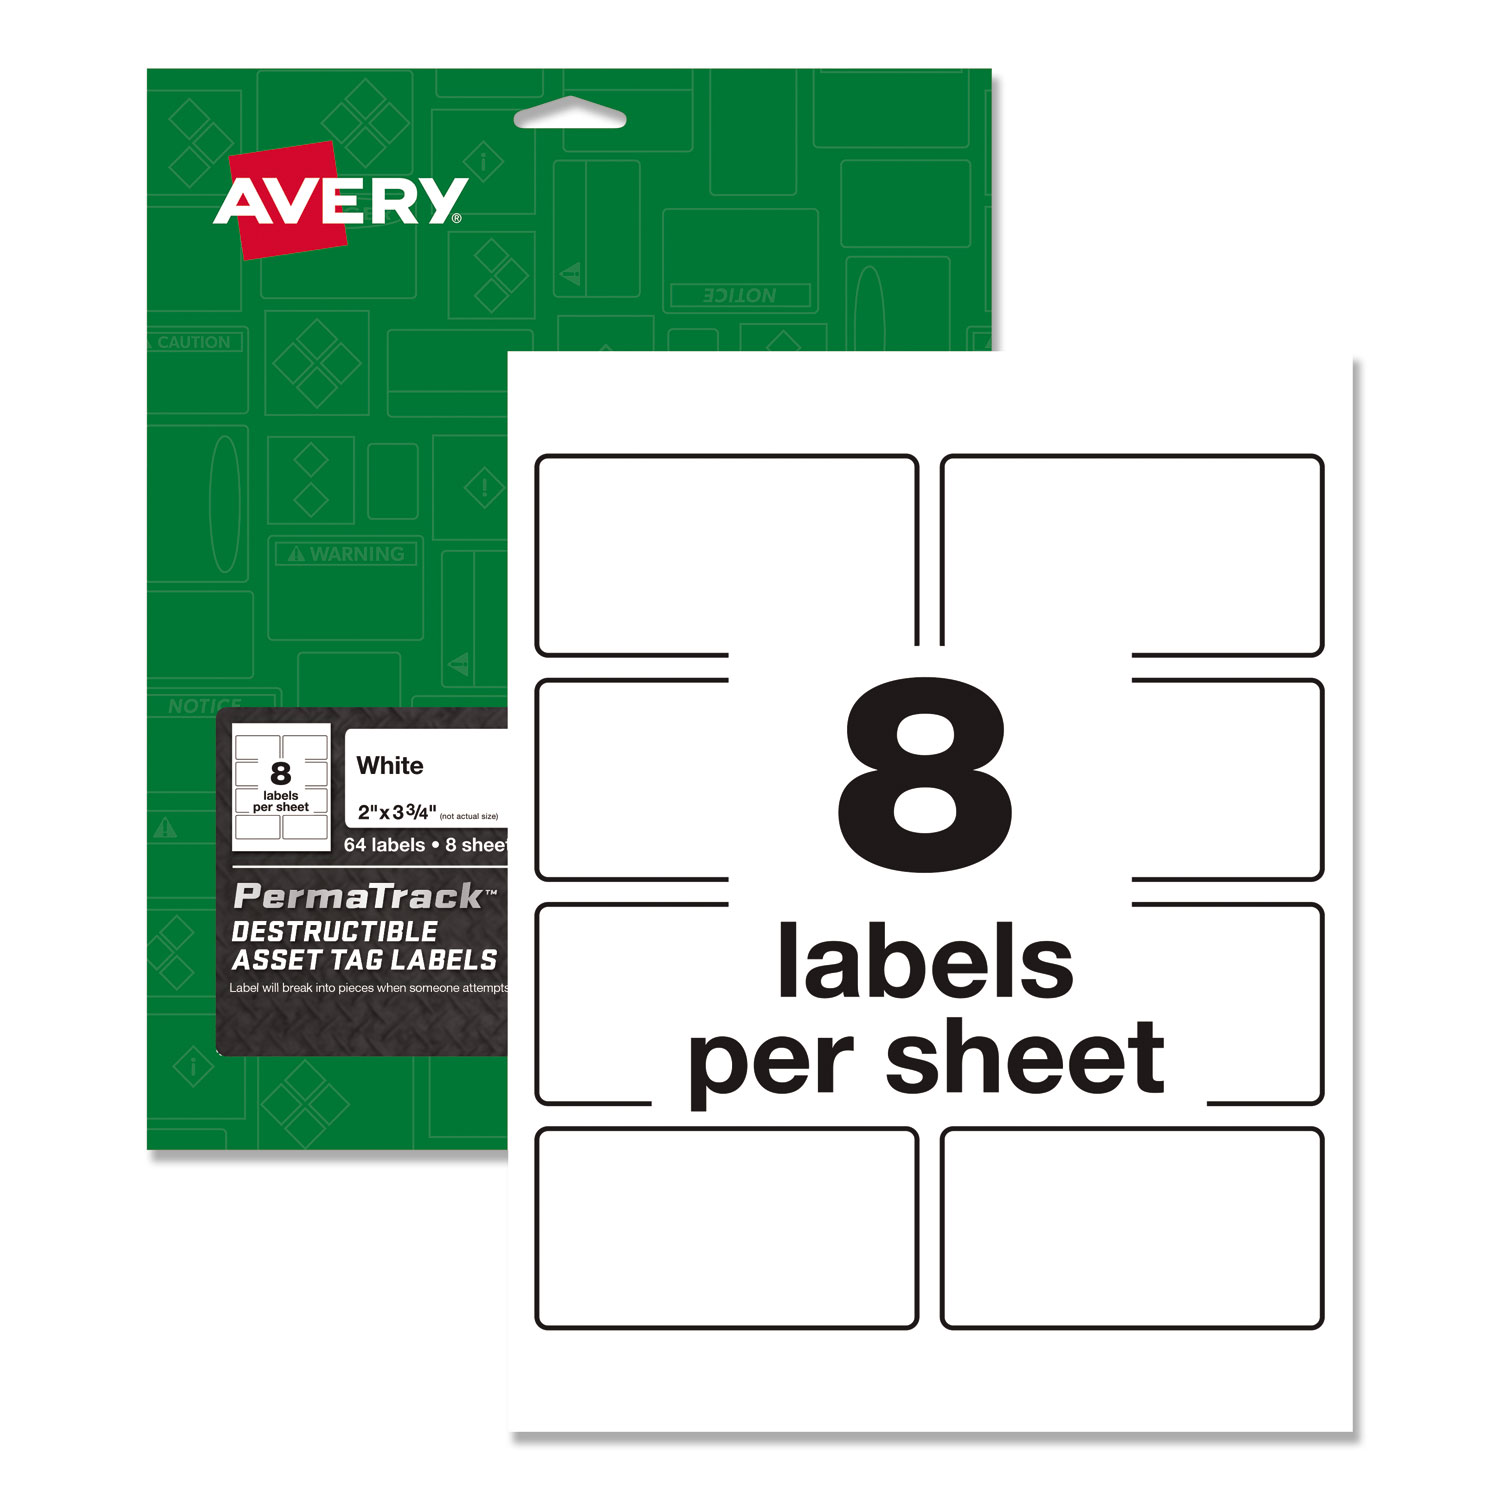  Avery 60539 PermaTrack Destructible Asset Tag Labels, Laser Printers, 2 x 3.75, White, 8/Sheet, 8 Sheets/Pack (AVE60539) 